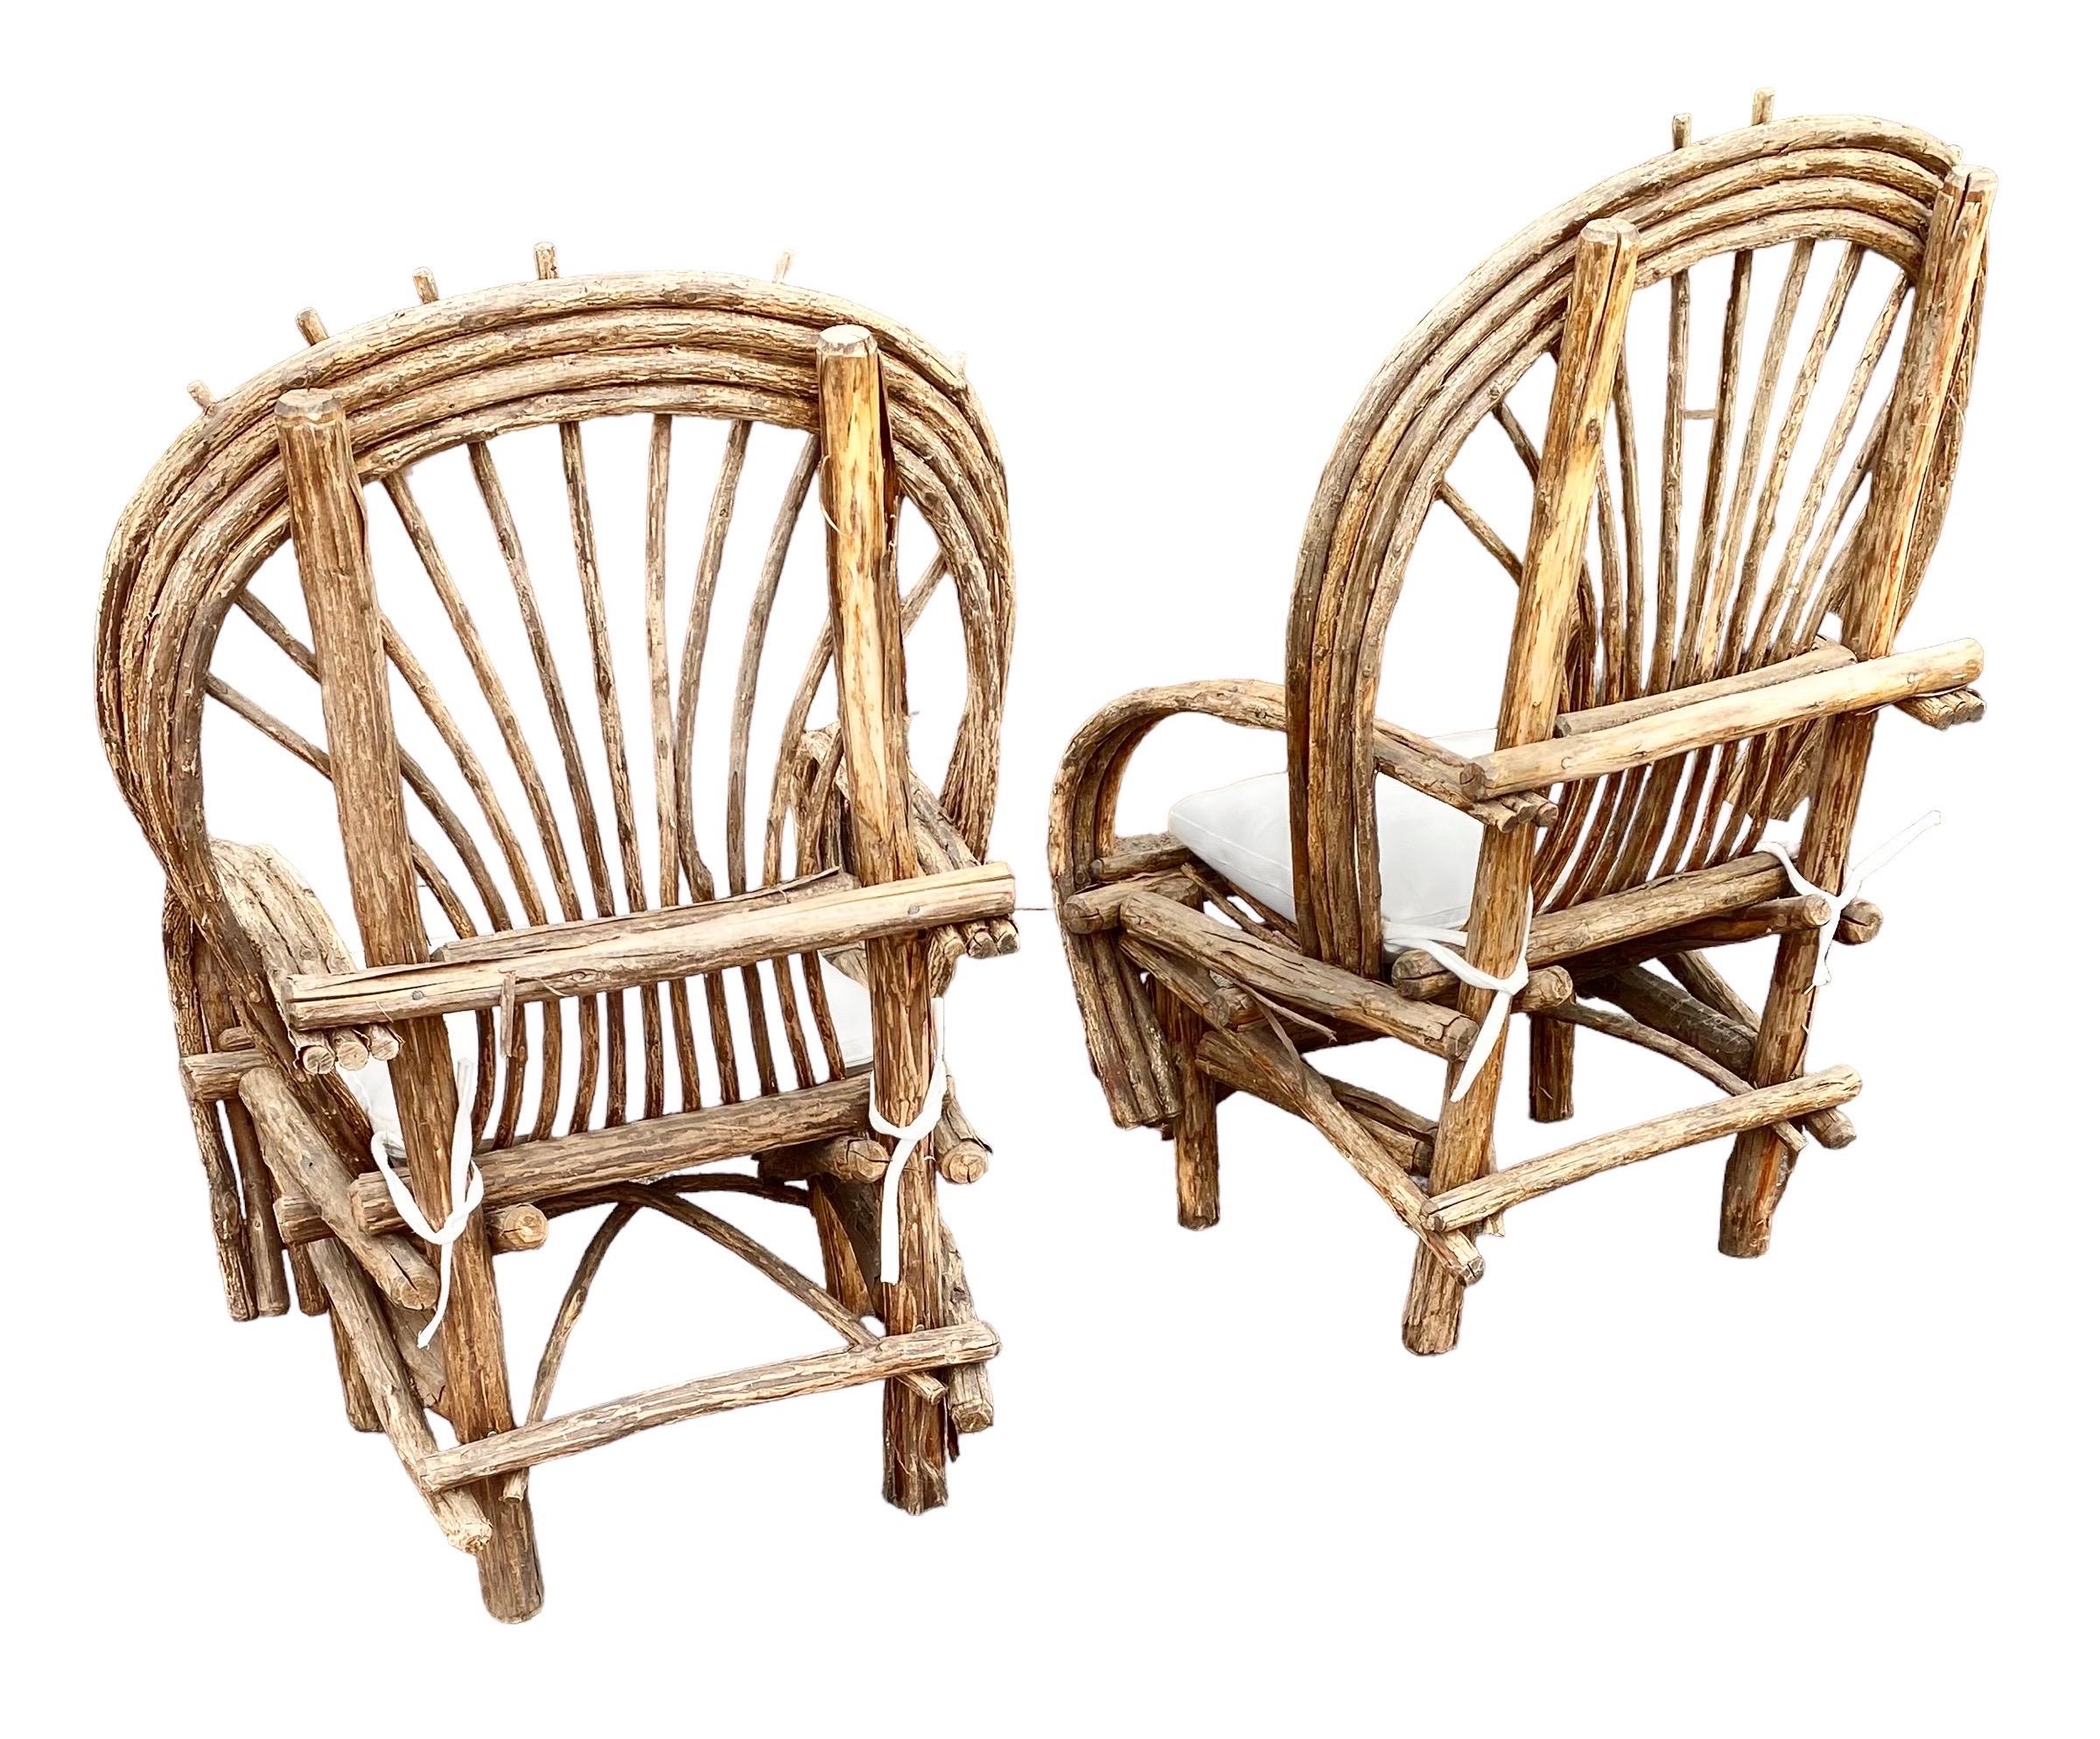 Pair of Hade Crafted Bent Willow Rustic Arm Chairs 2